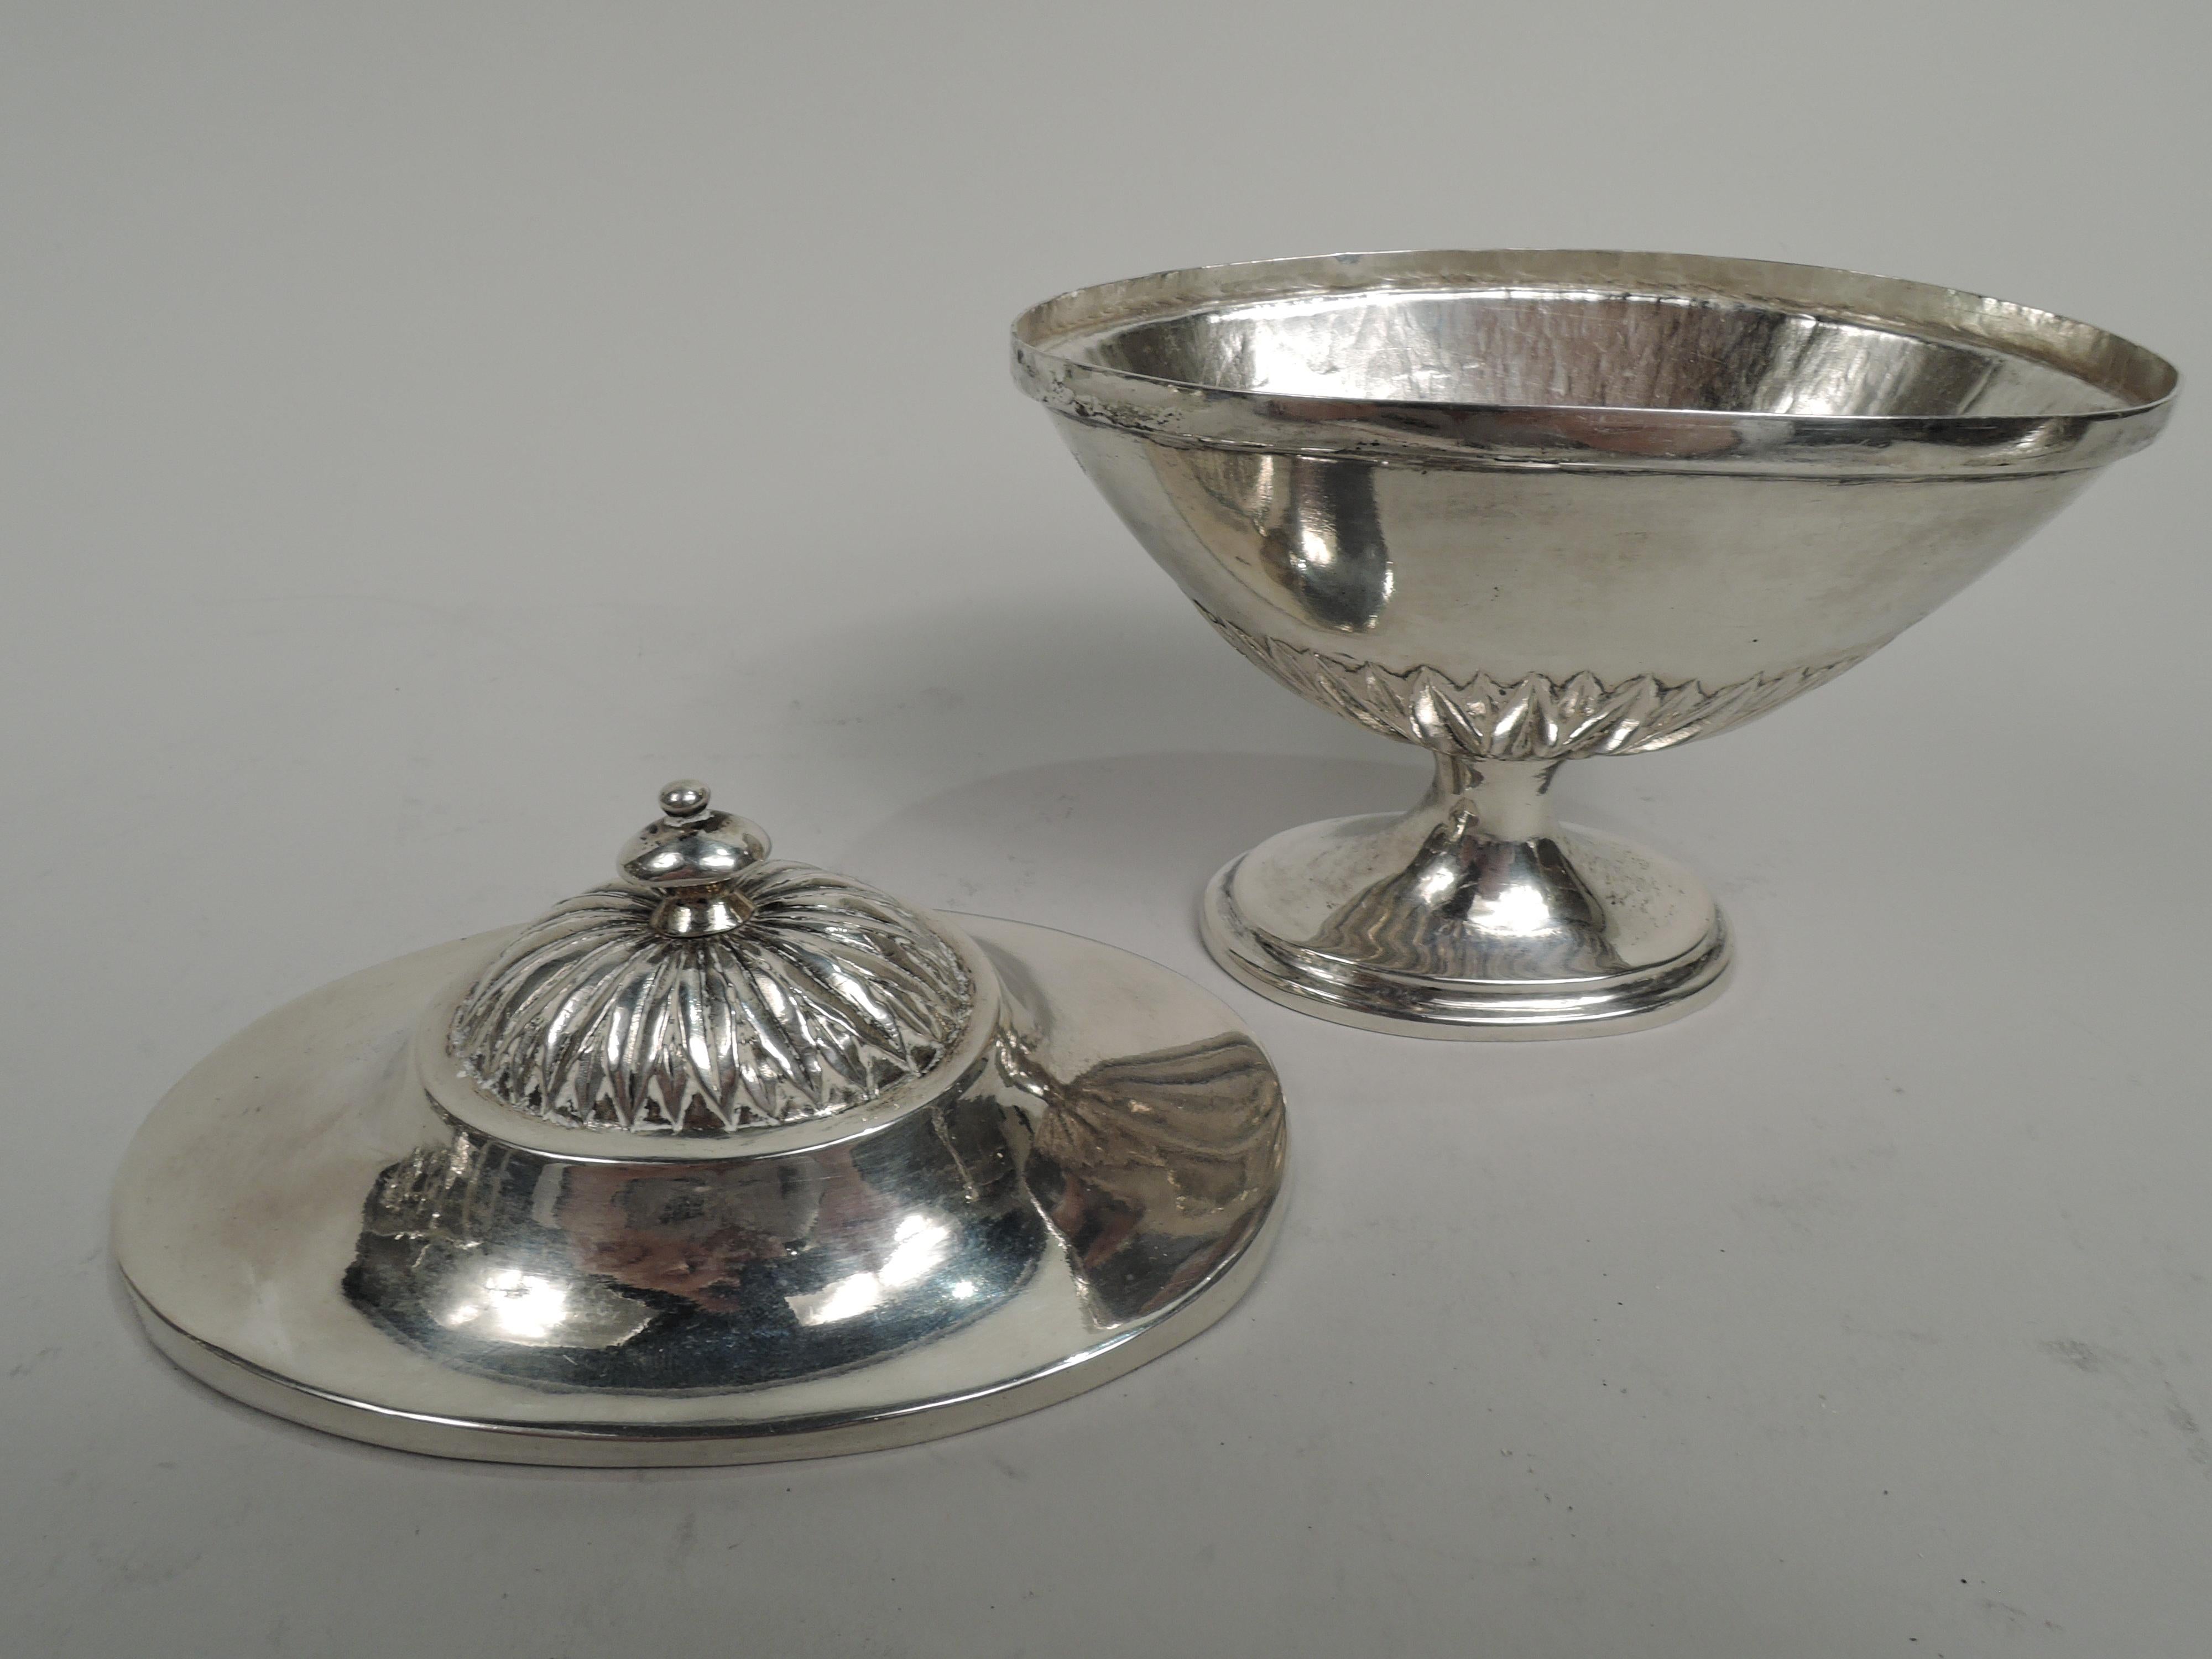 German Neoclassical silver urn, 18th century. Oval tapering bowl on raised and stepped foot. Cover domed with vasiform finial. Chased imbricated leaf border at bowl bottom; same on cover dome. Visible hammering and handwork. Marked. Weight: 5 troy